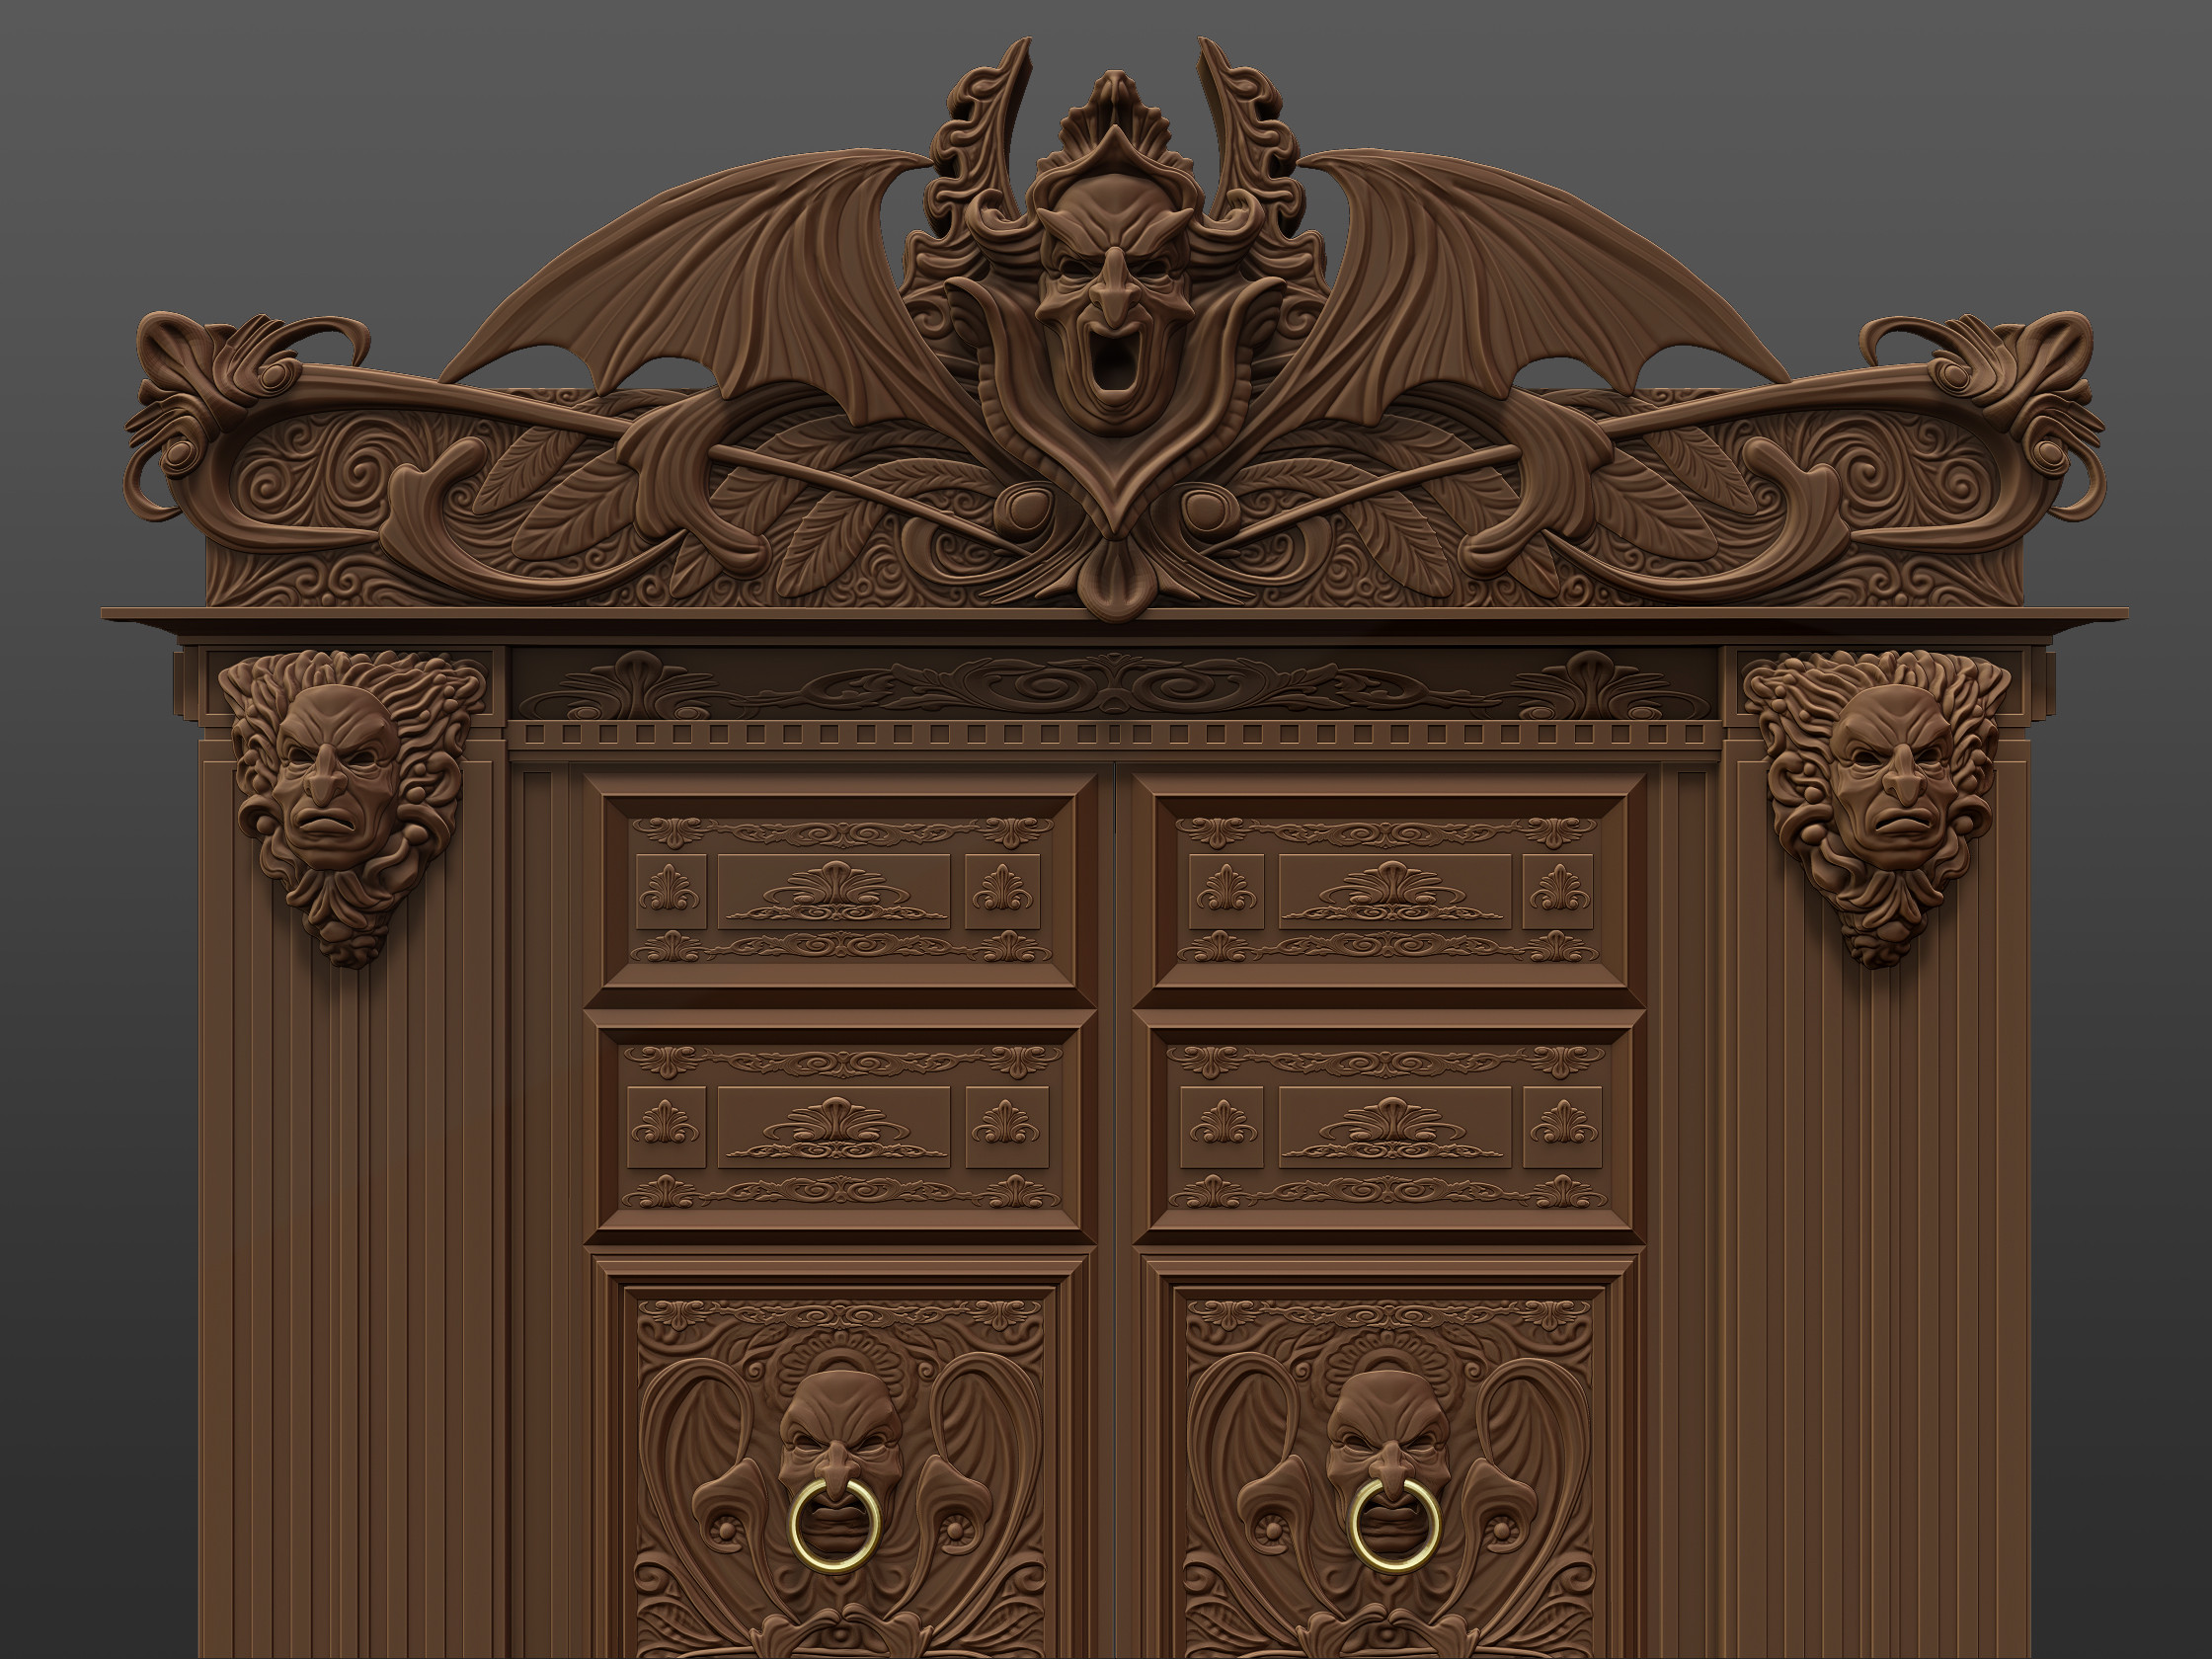 detail of the doorway I sculpted for the scene.